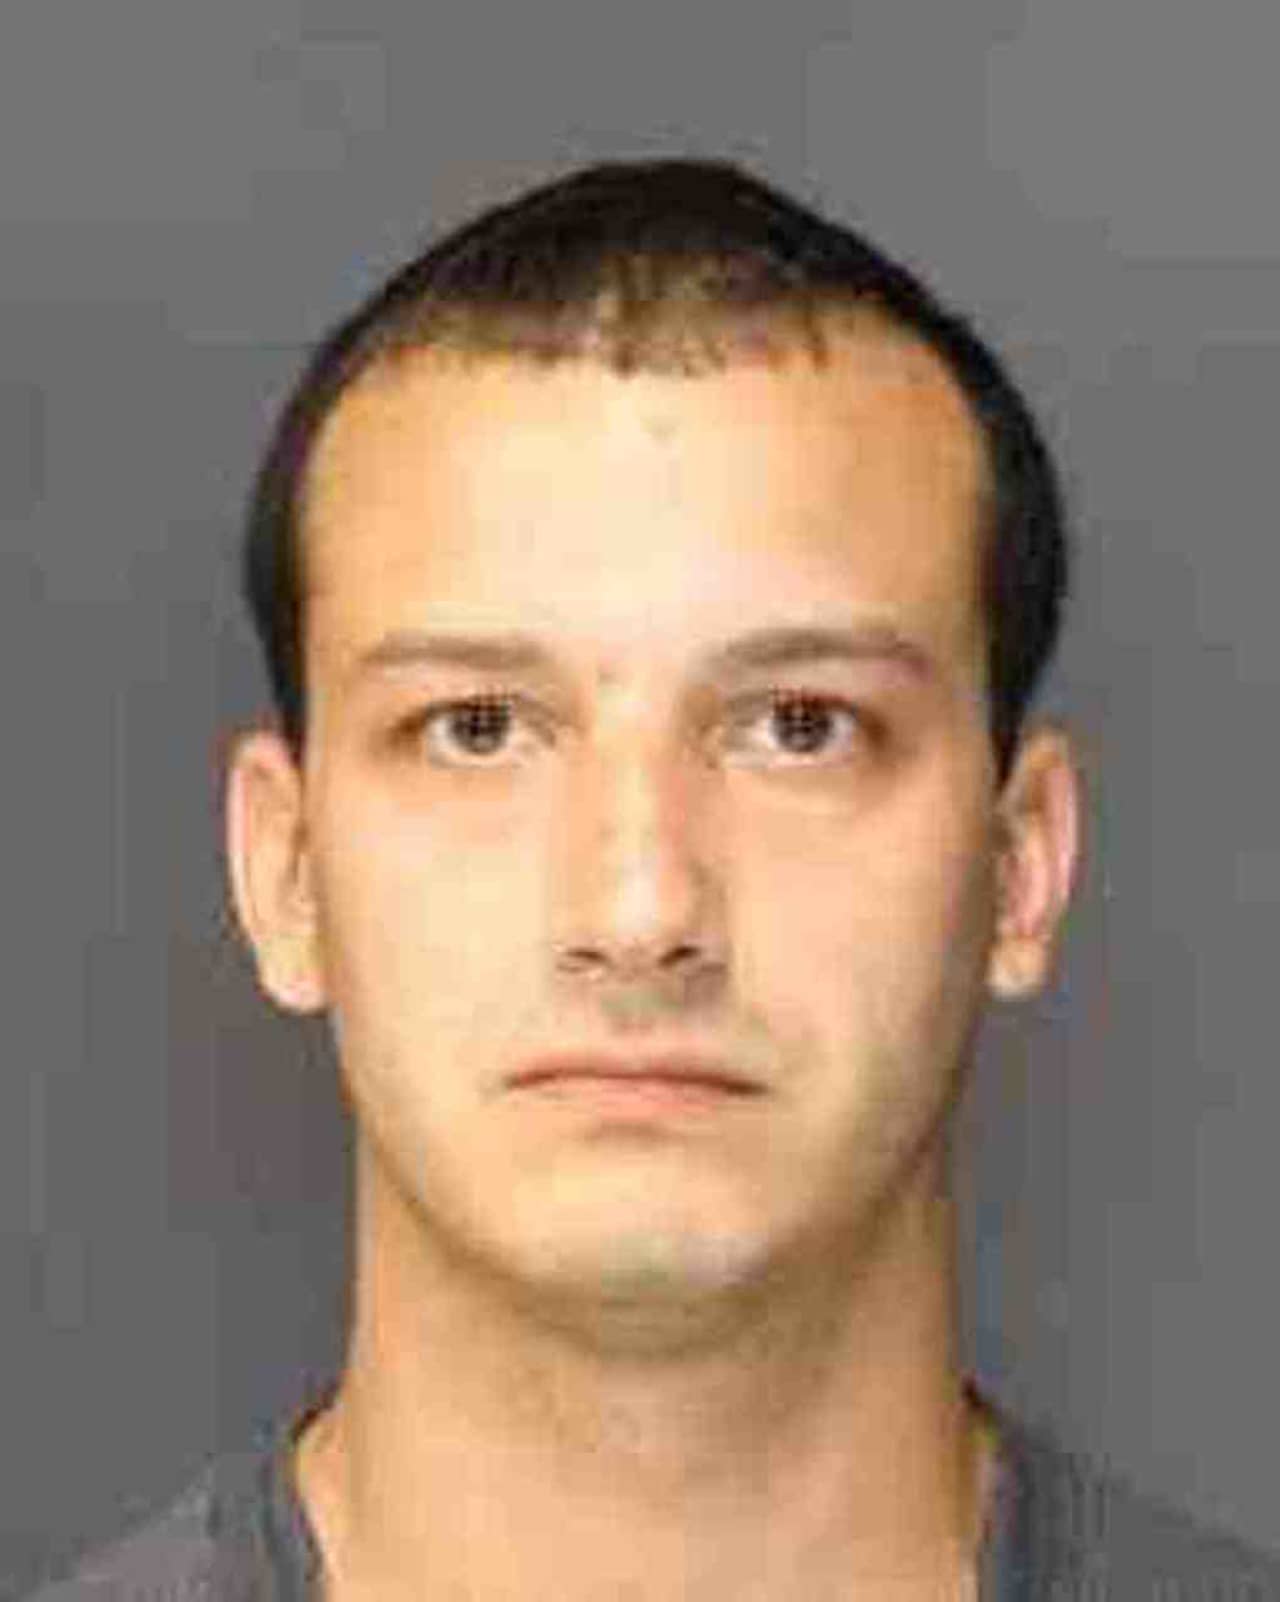 Gerard Campitiello, 26, of West Nyack, has been charged with breaking into a locker at a Pearl River fitness center and taking a wallet.